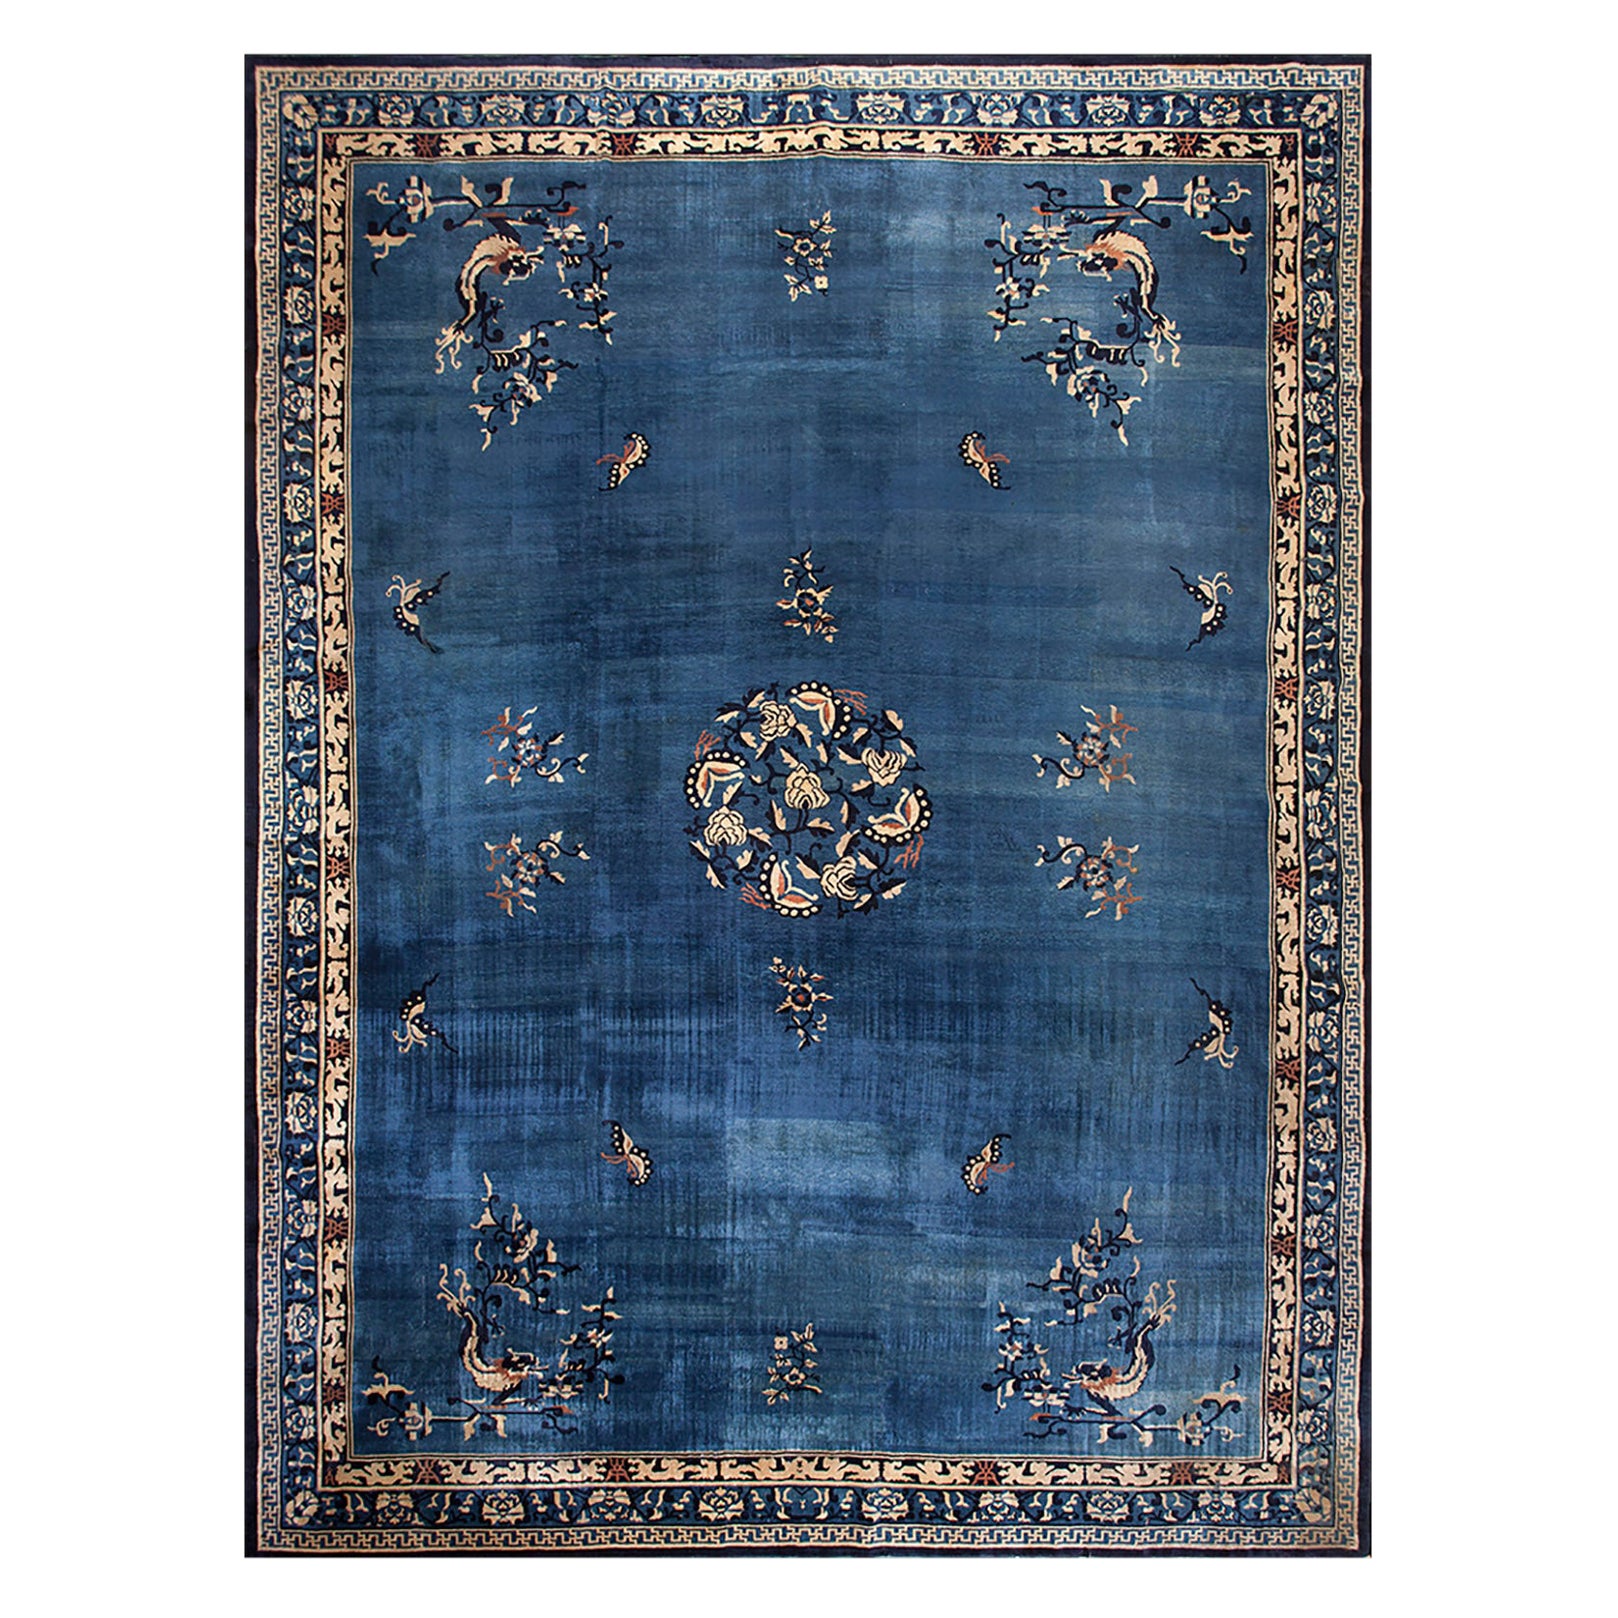 Early 20th Century Chinese Carpet ( 14'6" x 20'2" - 442 x 615 ) For Sale